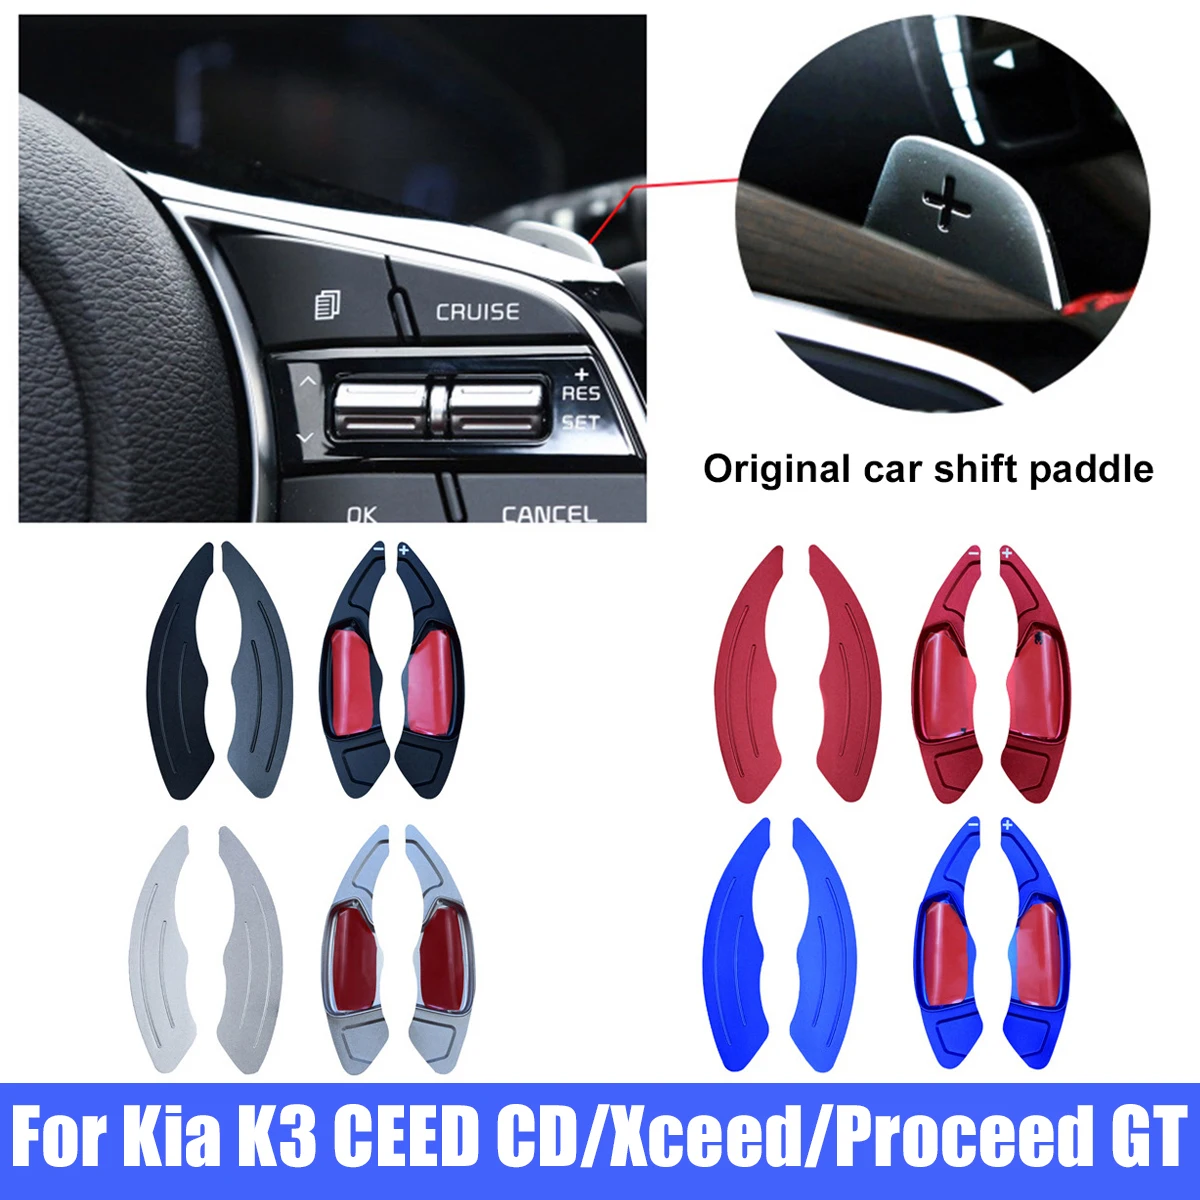 For Kia K3 CEED CD Xceed Proceed GT 2PCS Quality Aluminum Alloy Steering Wheel Shift Paddle Shifter Extension